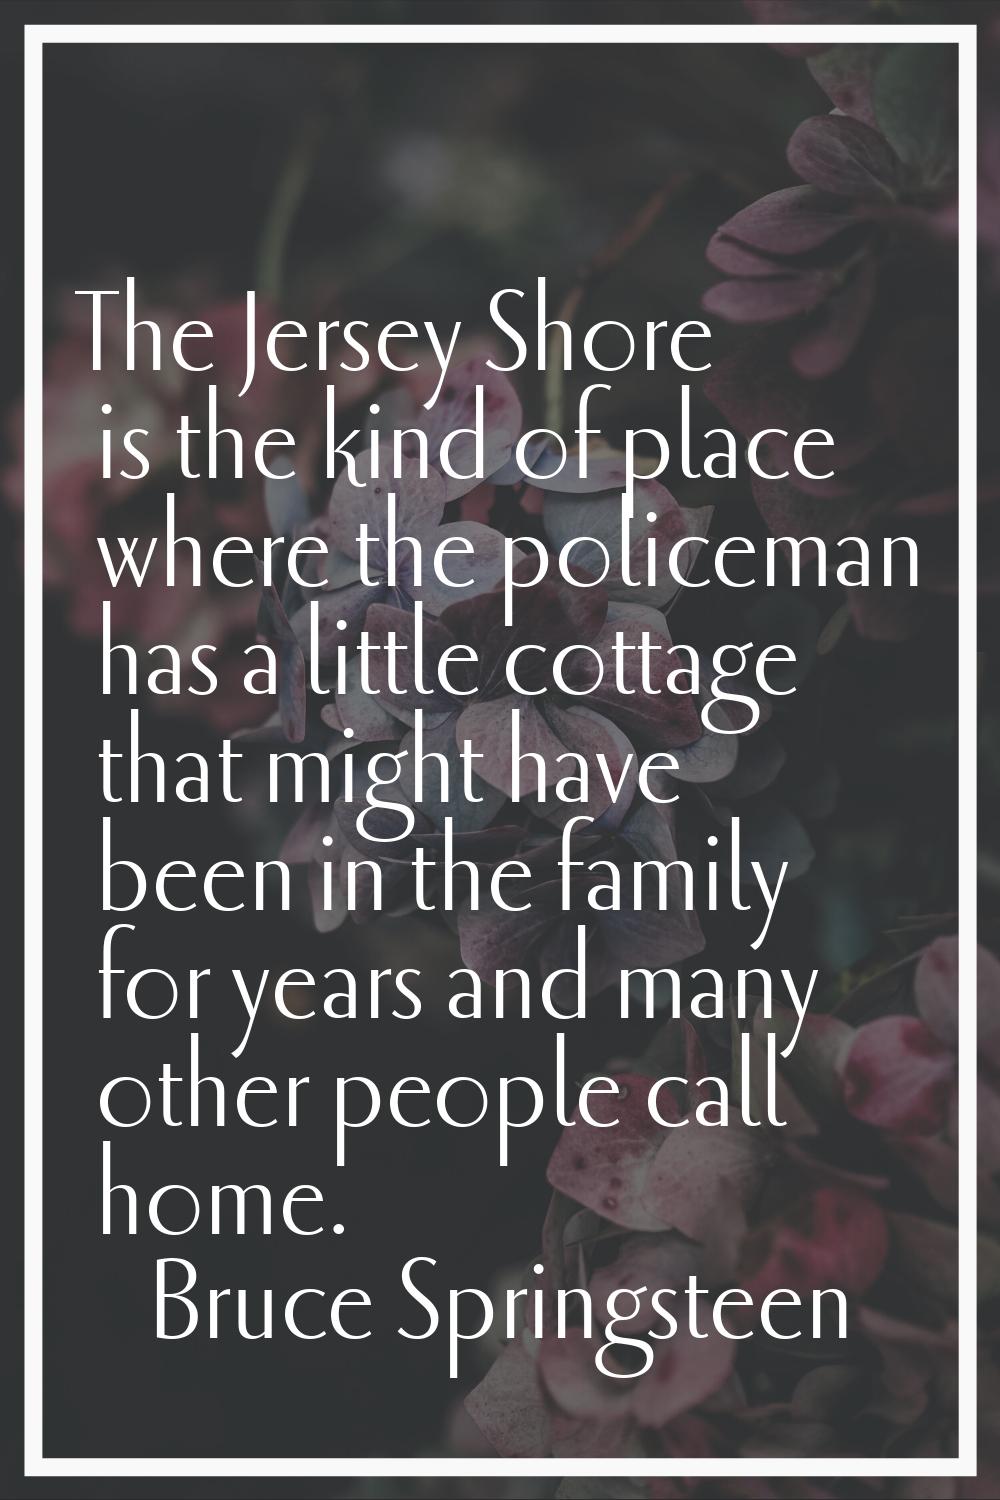 The Jersey Shore is the kind of place where the policeman has a little cottage that might have been